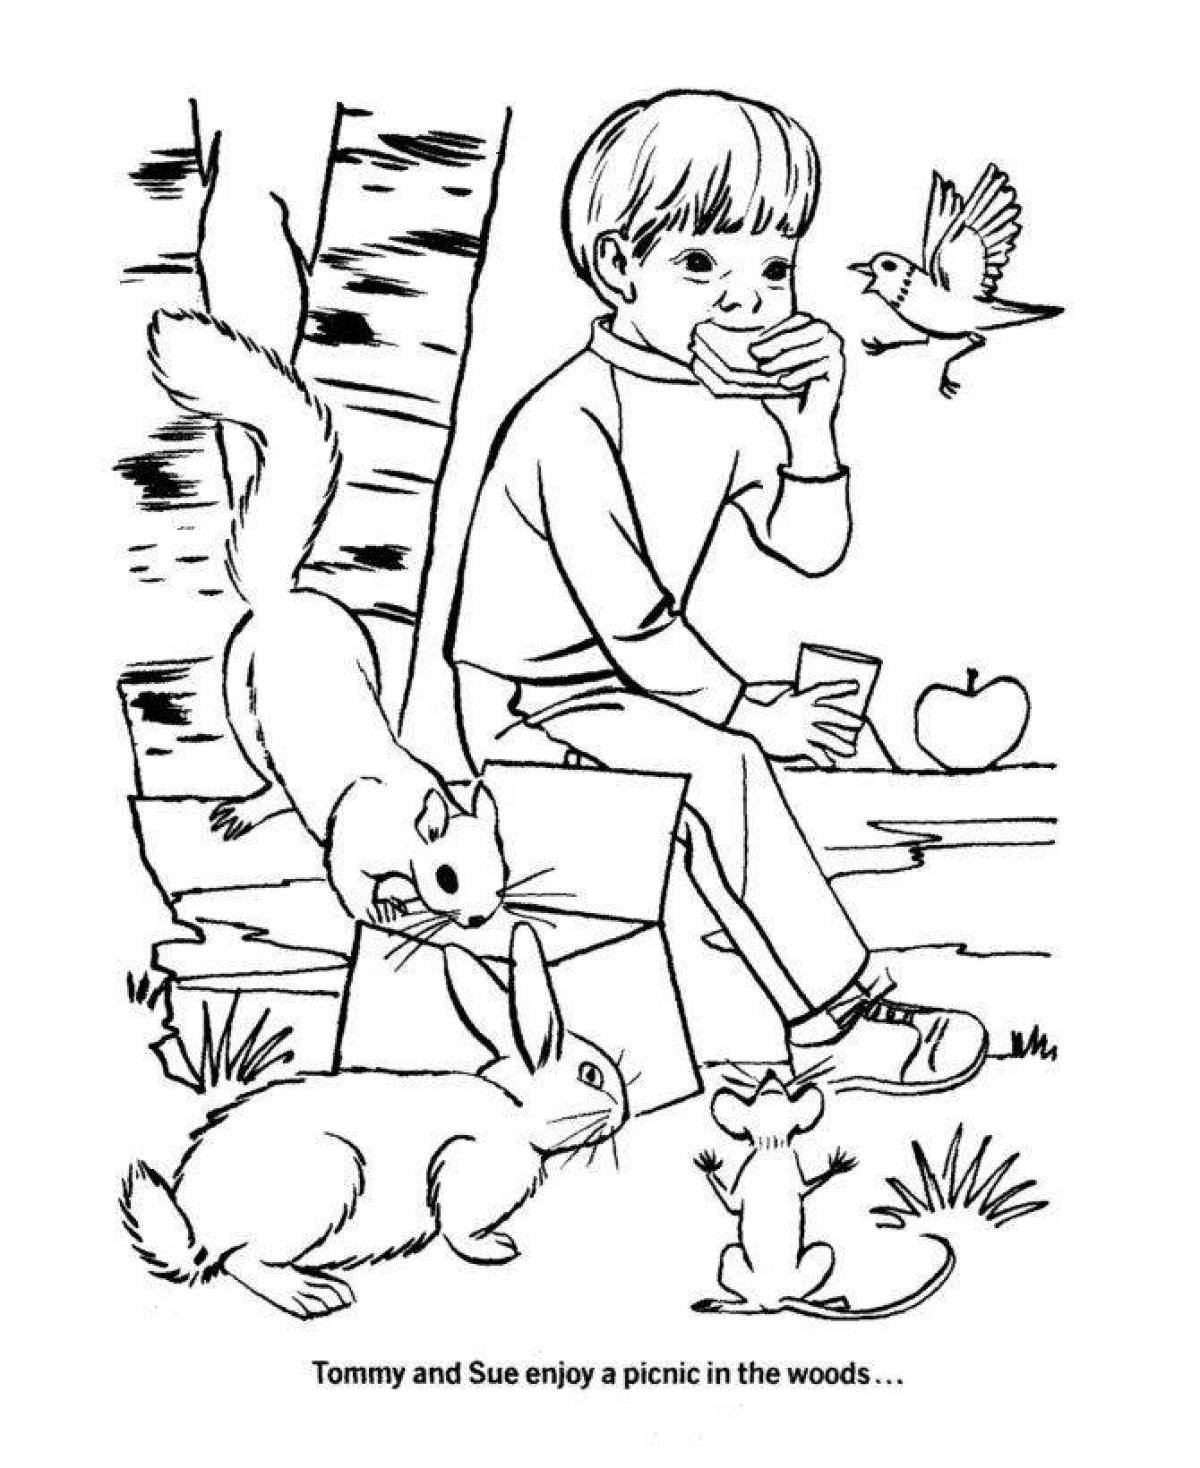 Coloring page magnanimous protection of nature